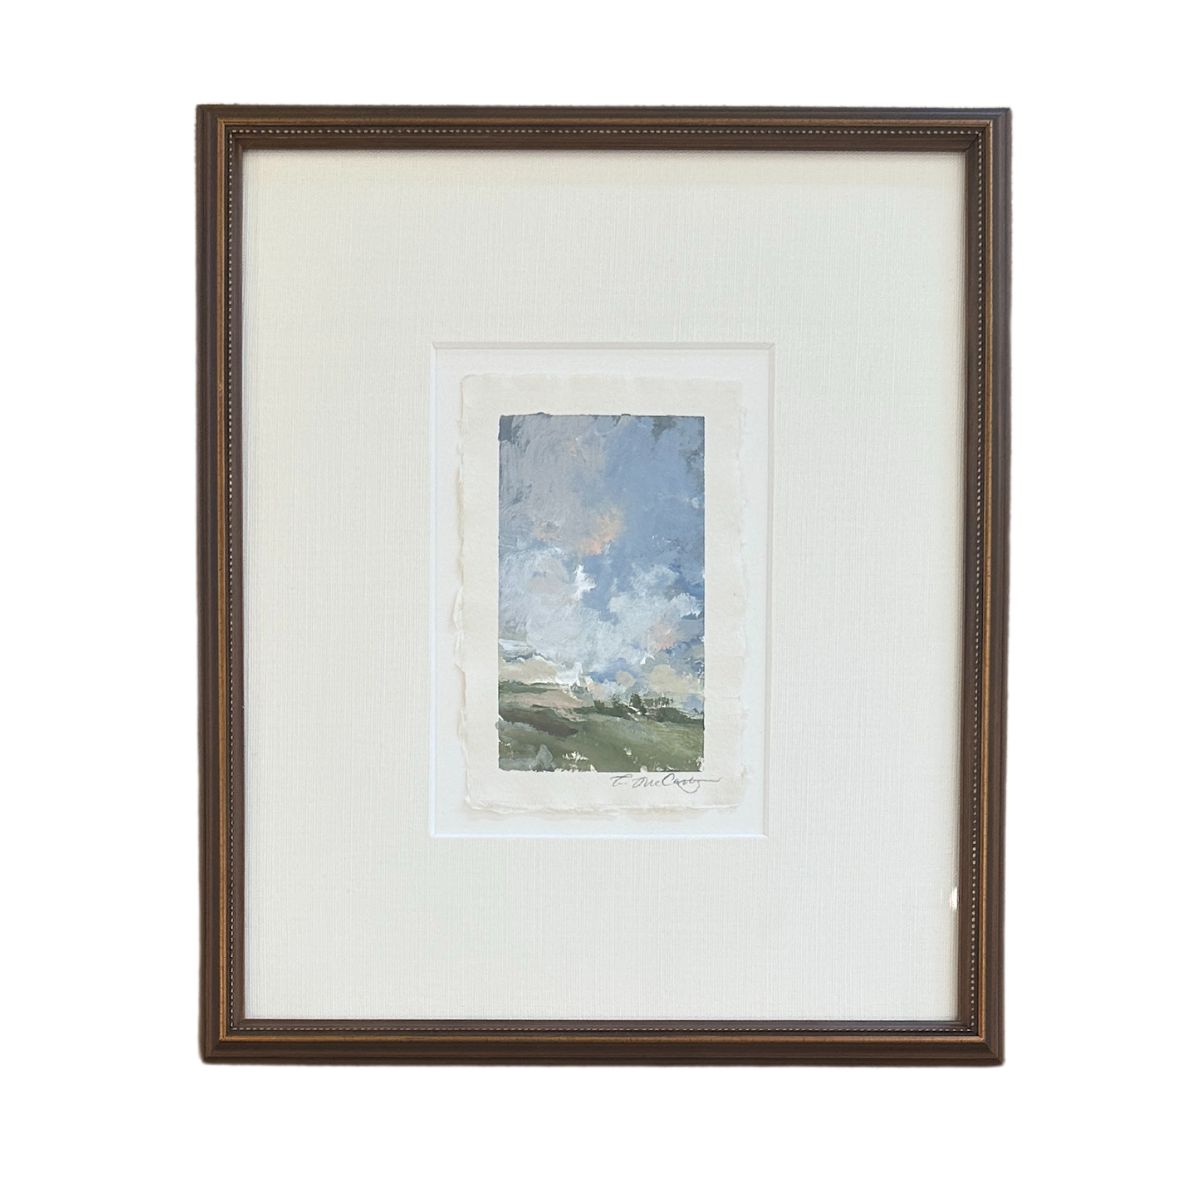 Framed Landscape by Laura McCarty #2